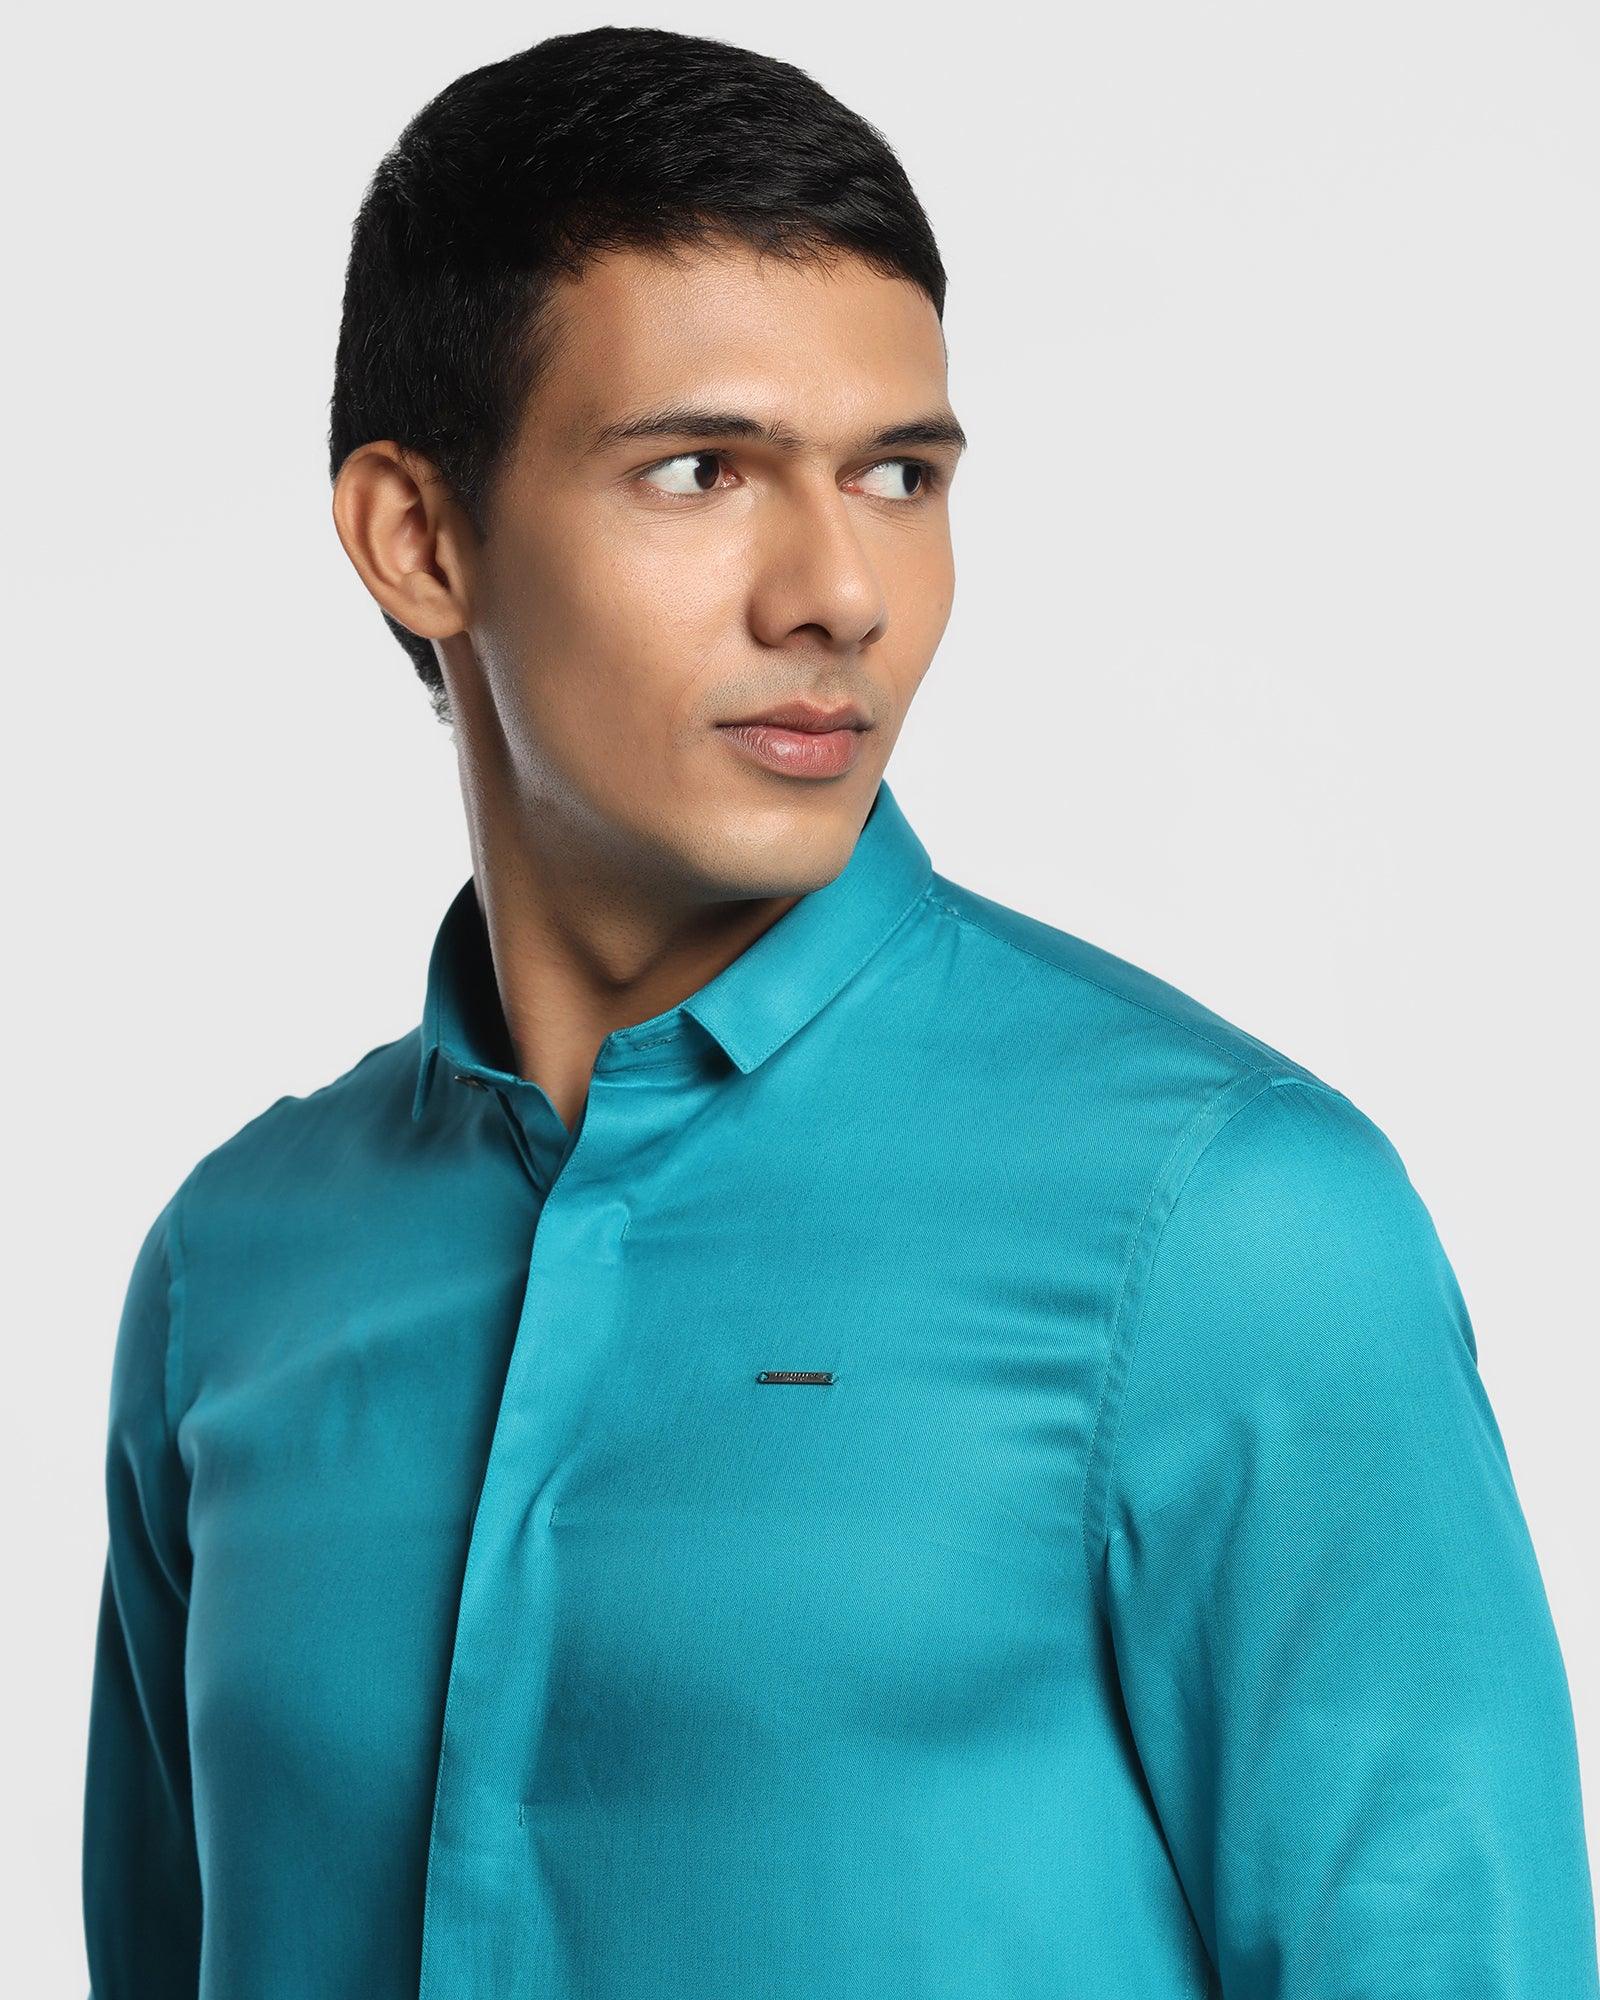 Casual Teal Solid Shirt - Cosmic